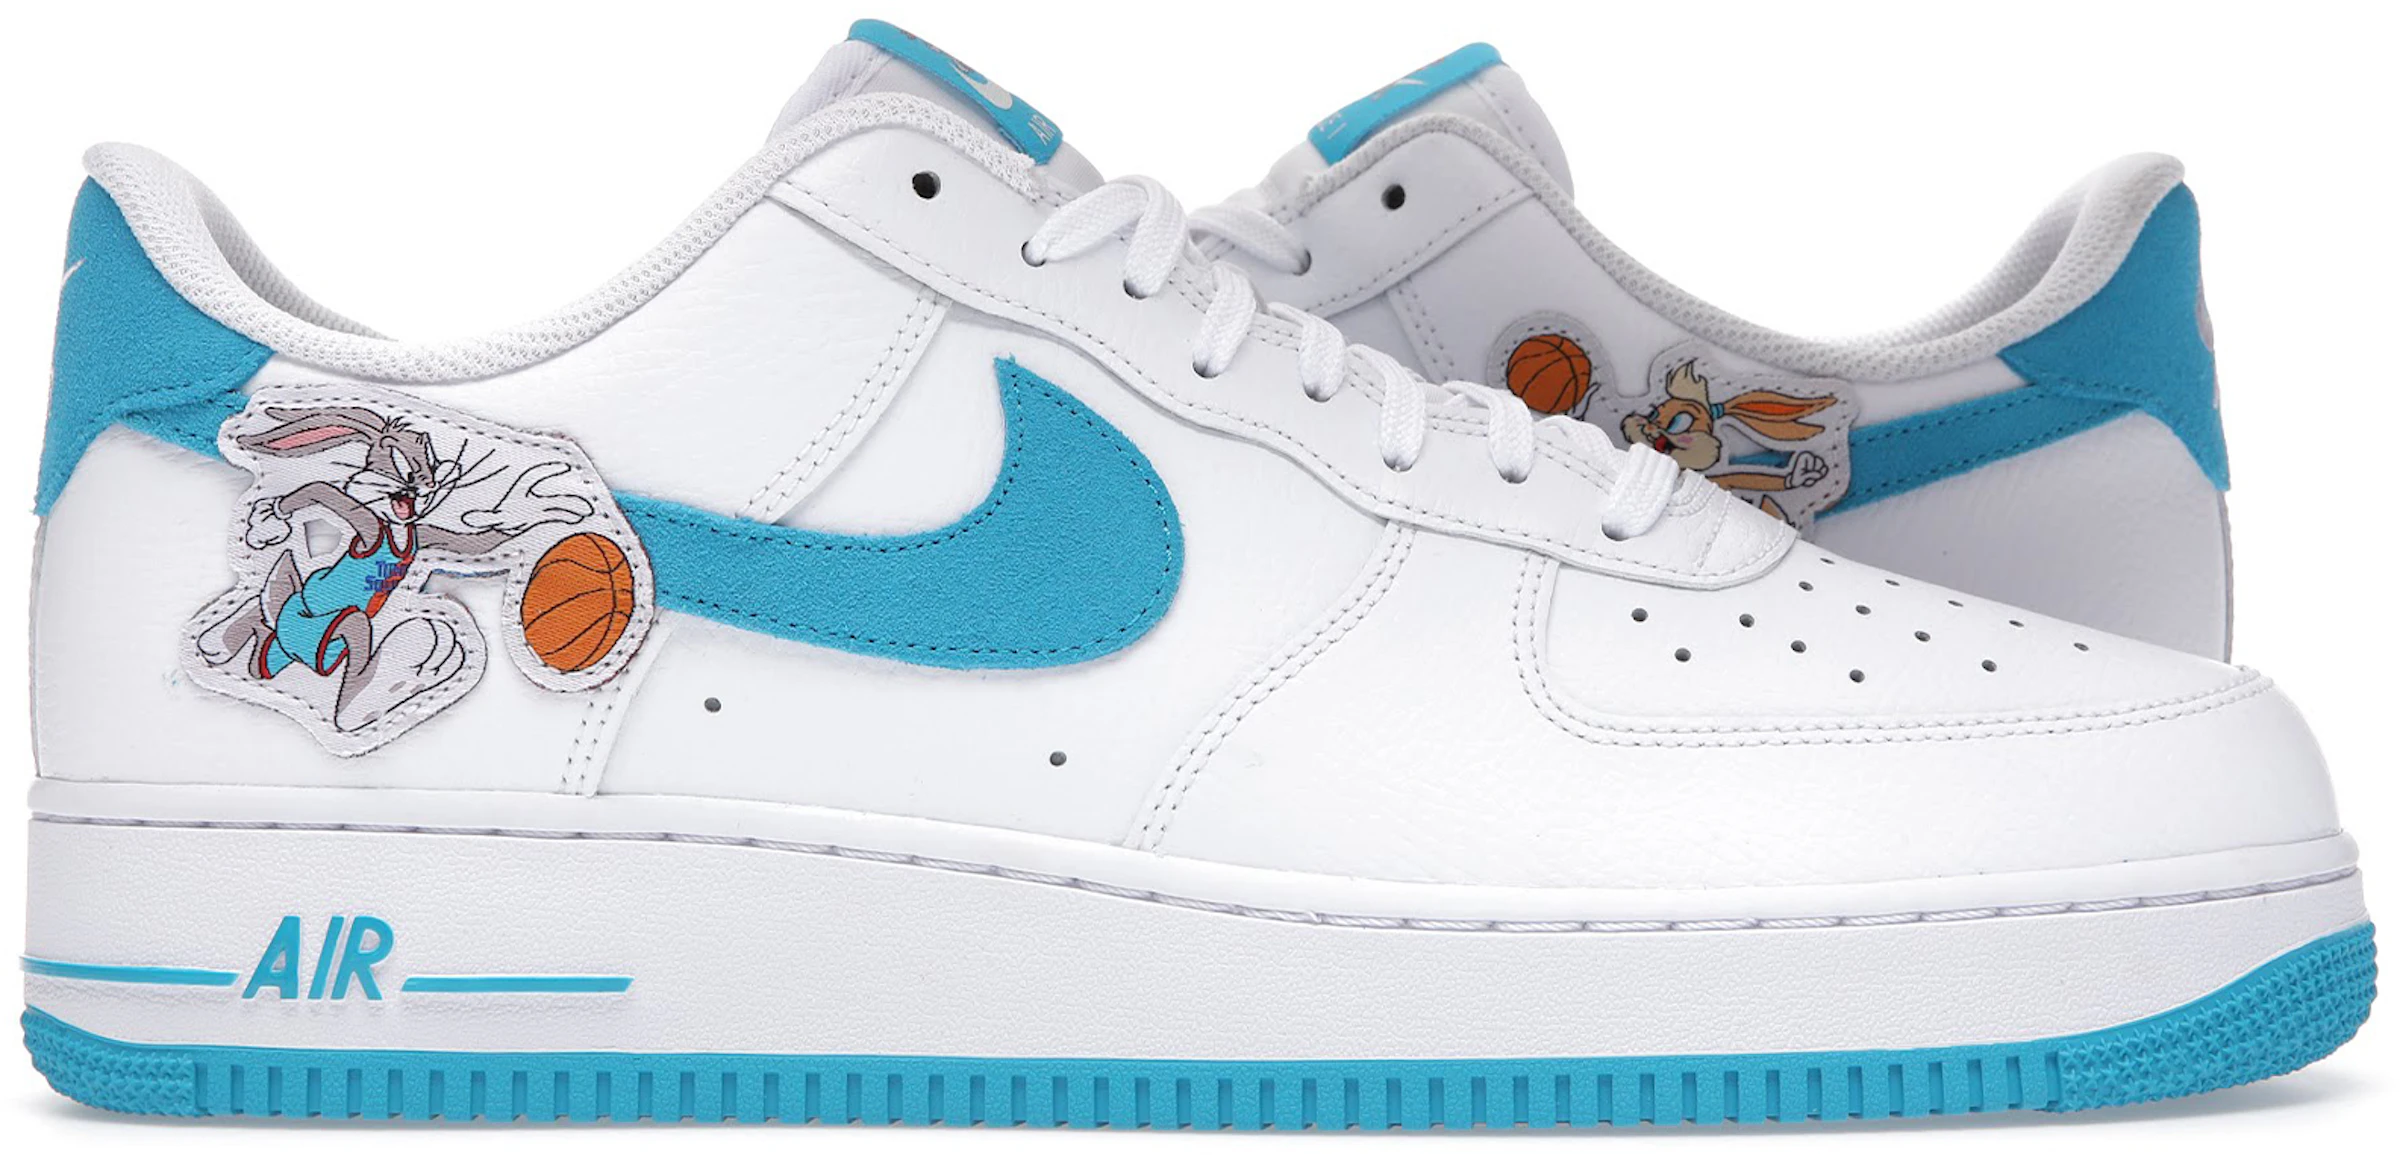 Nike Air Force 1 Low Hare Space Jam - DJ7998-100 US